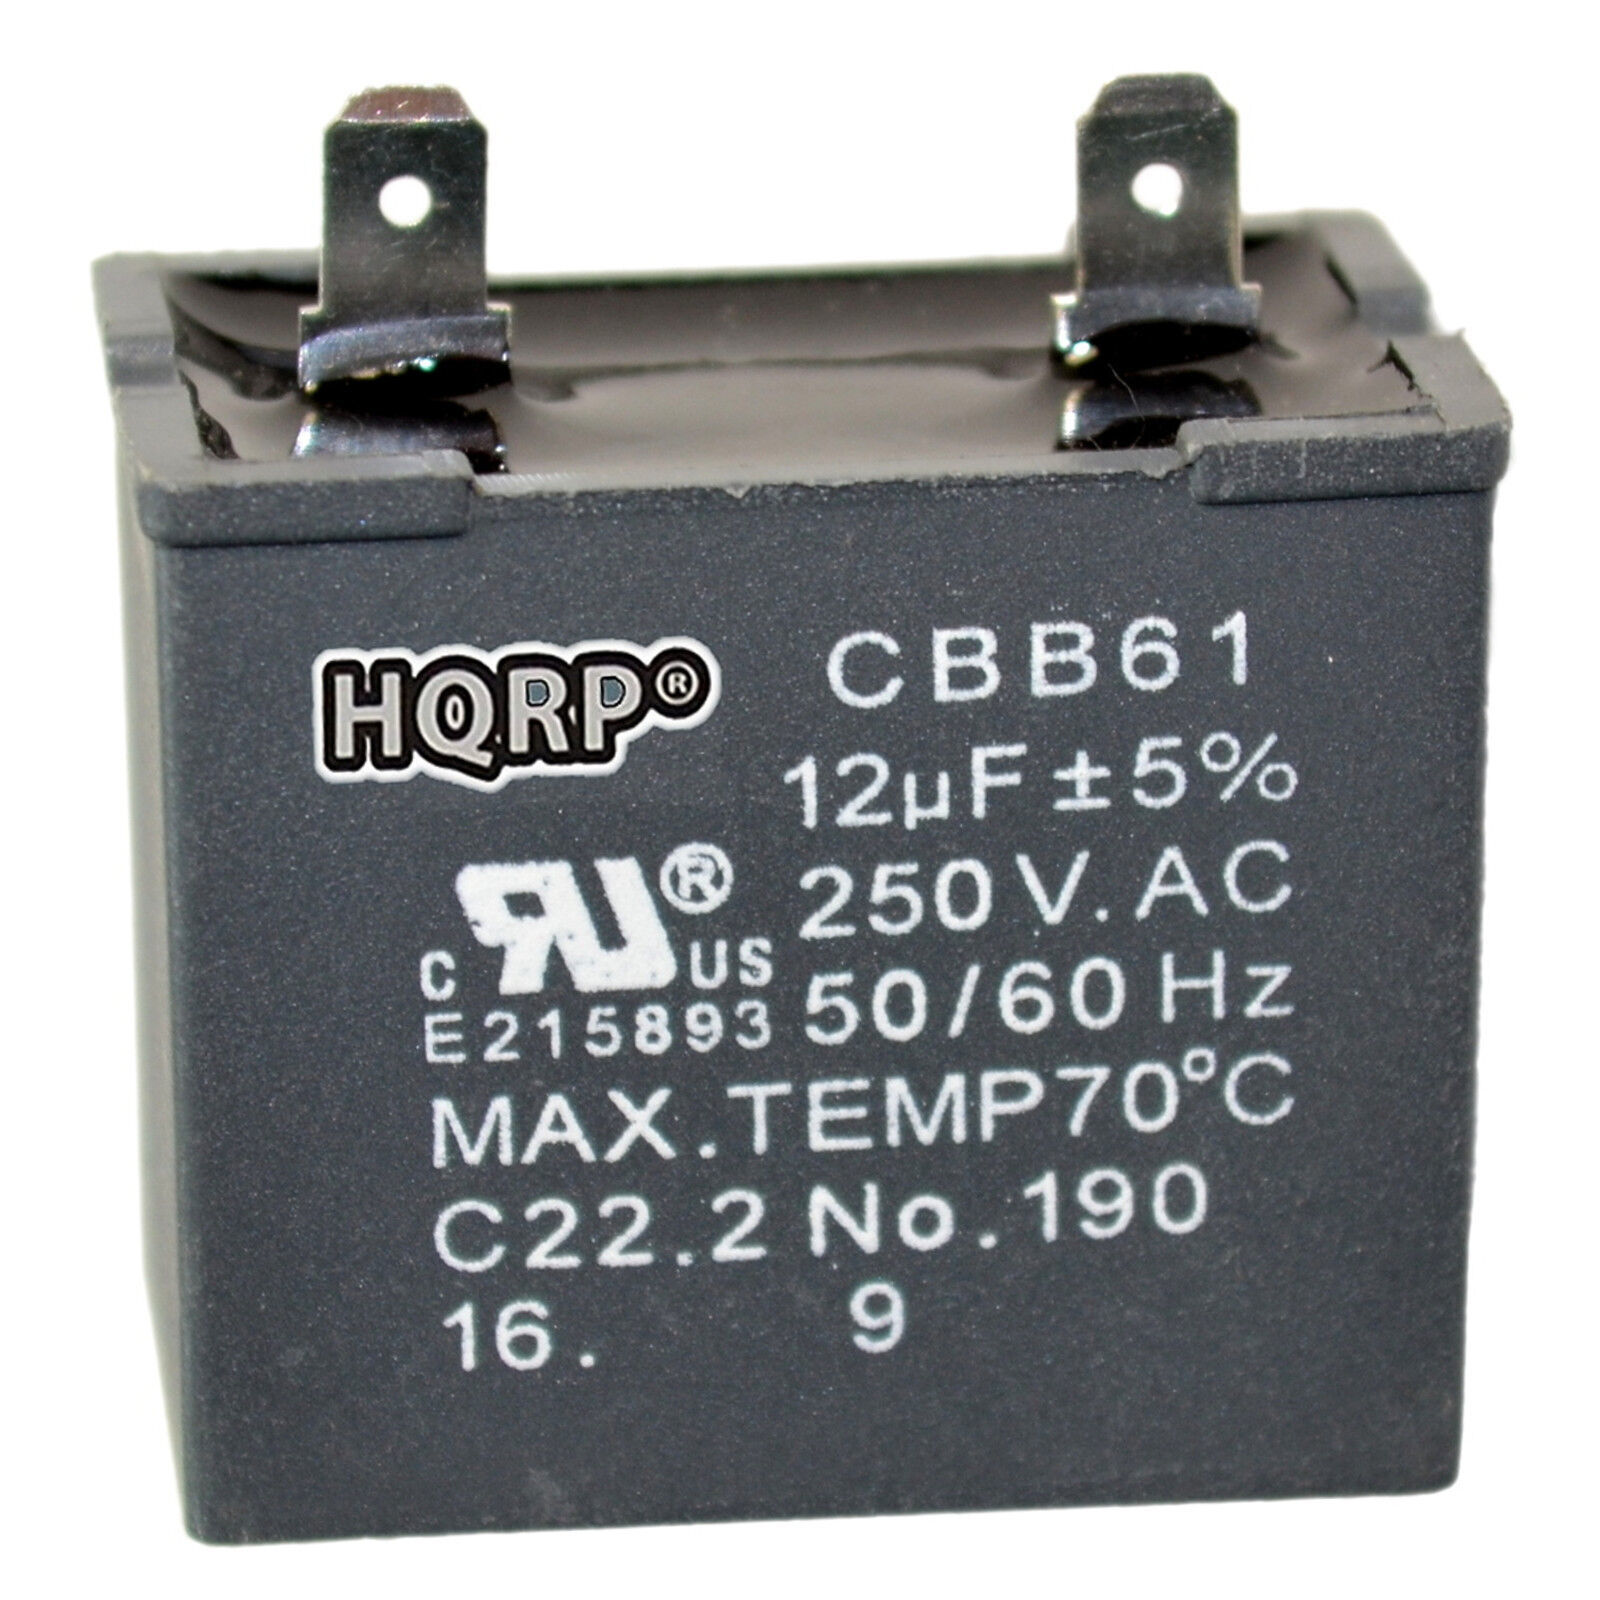 Primary image for 12uf Motor Capacitor for Whirlpool Refrigerators, 2169373 W10662129 Replacement